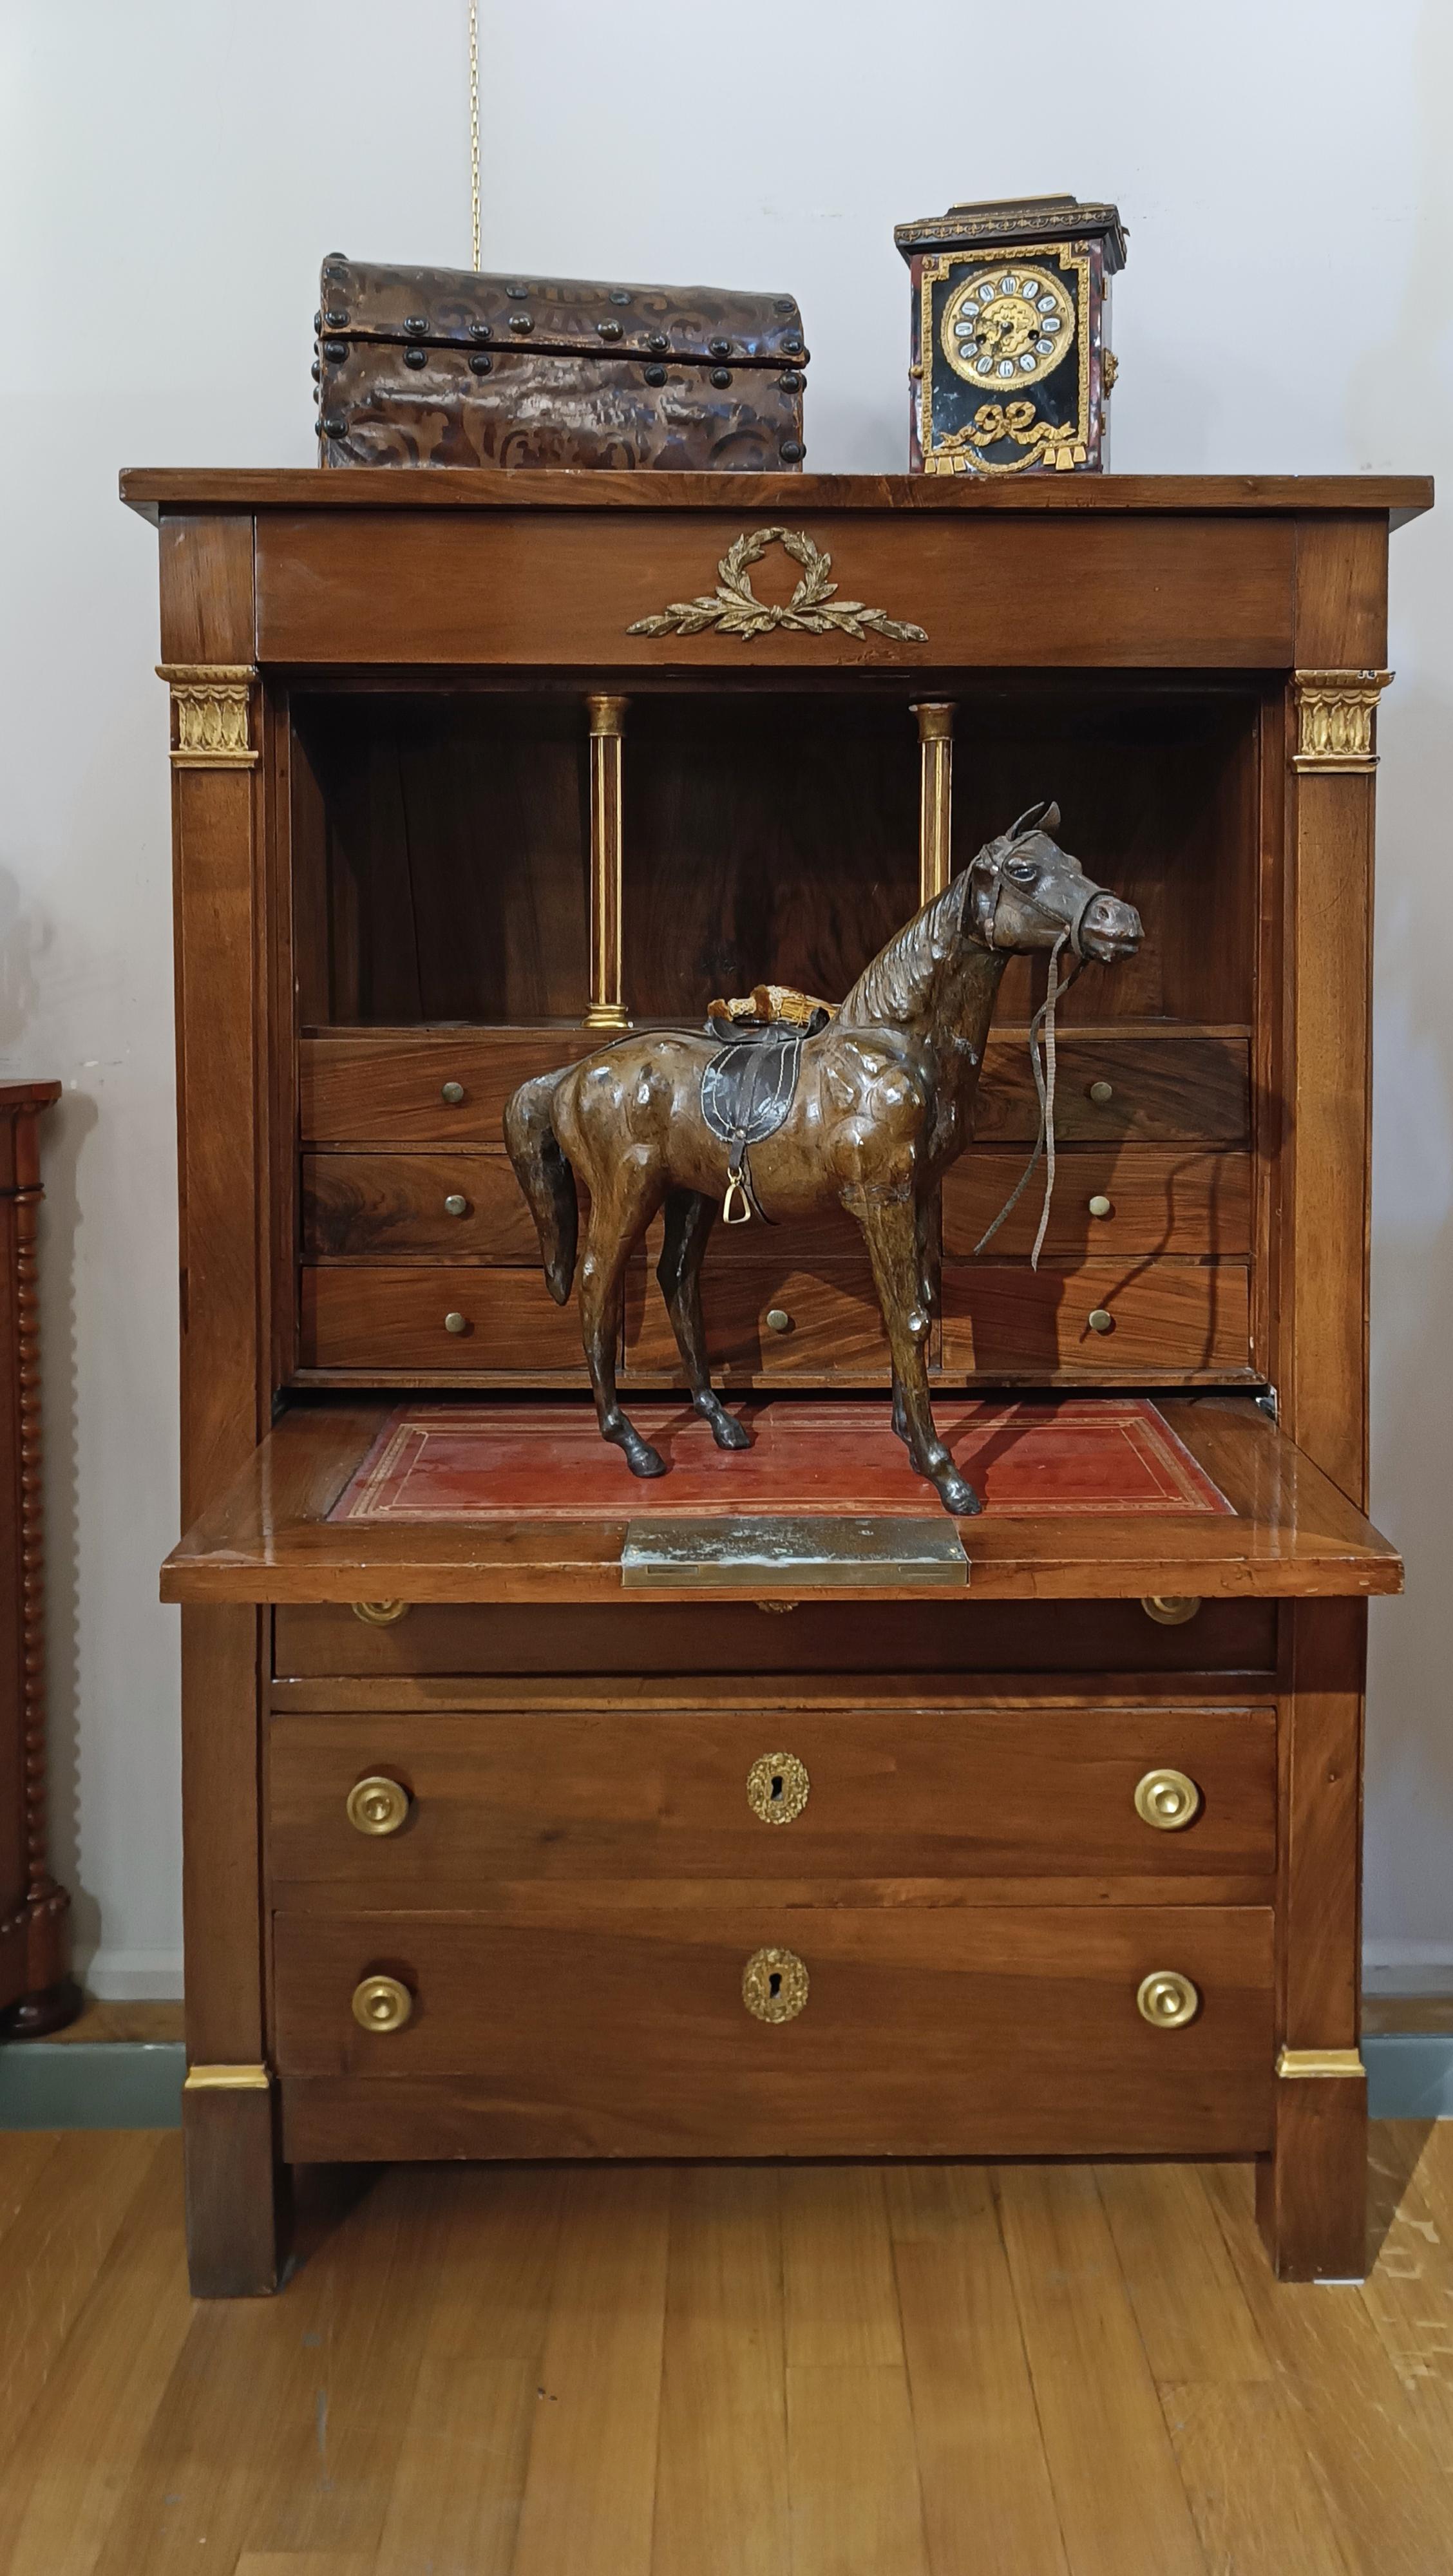 EARLY 19th CENTURY NEOCLASSICAL SECRÉTAIRE IN SOLID WALNUT  2